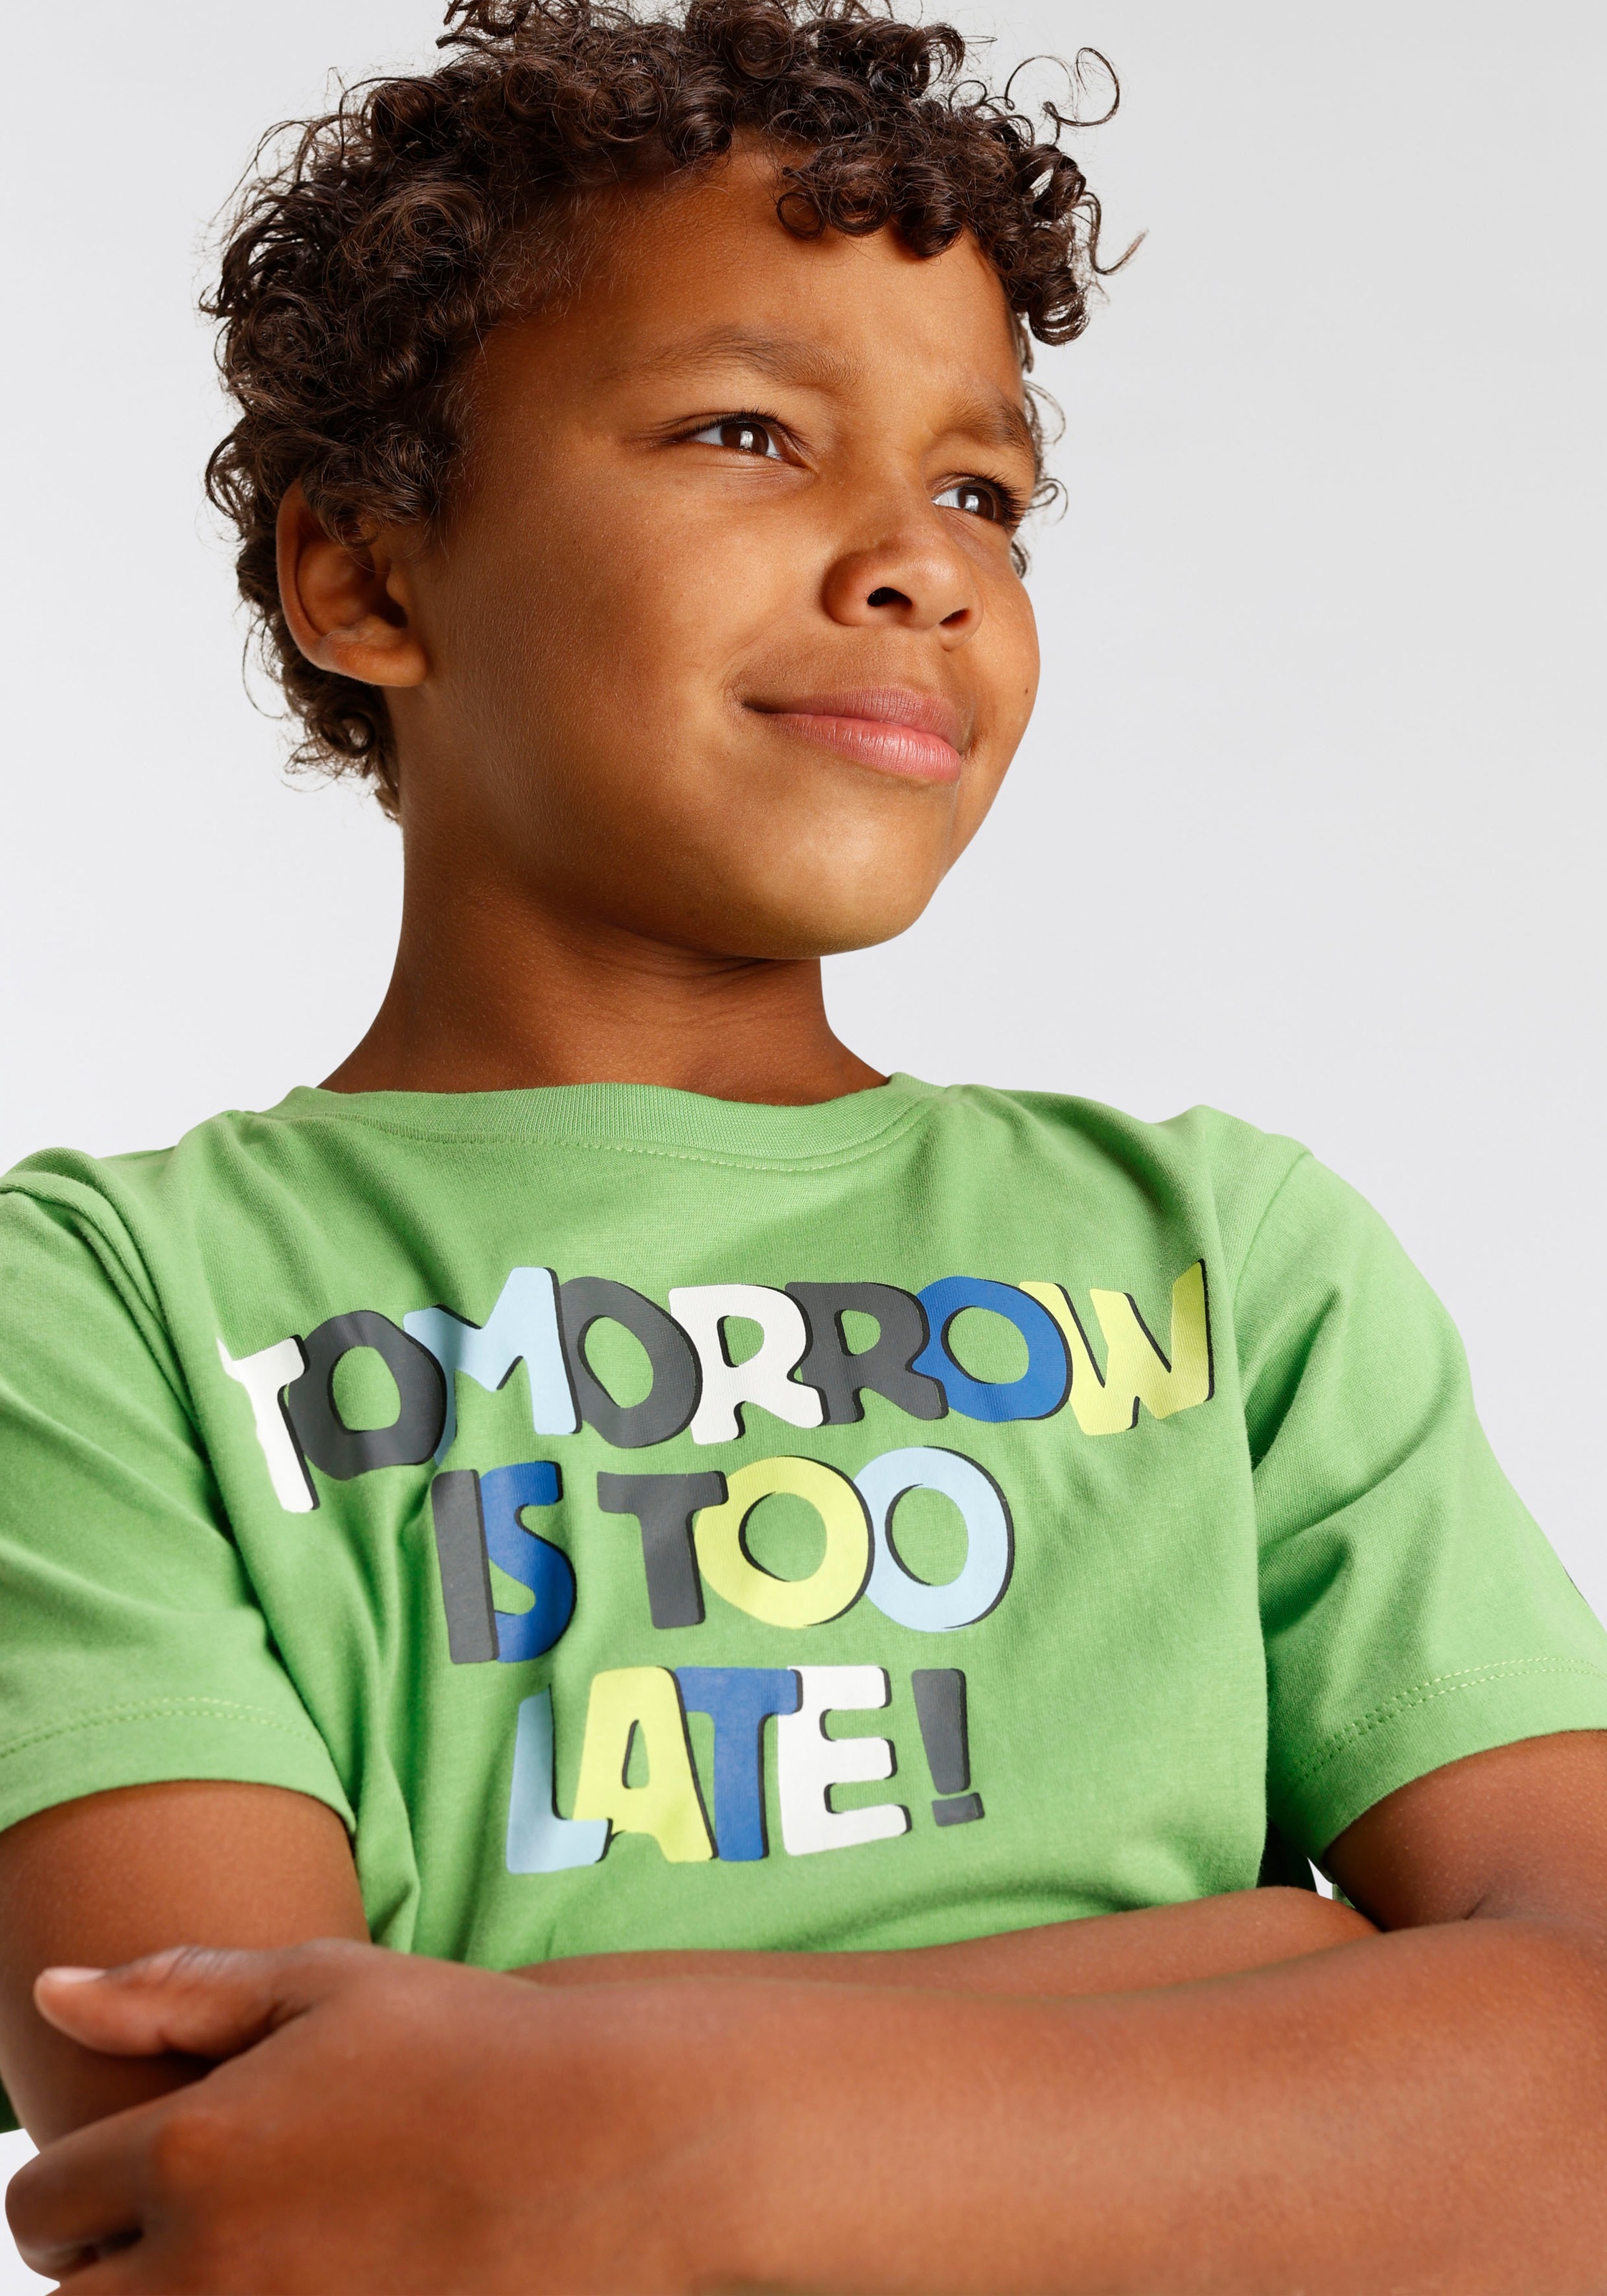 LATE«, T-Shirt »TOMORROW OTTO TOO bei Spruch IS KIDSWORLD